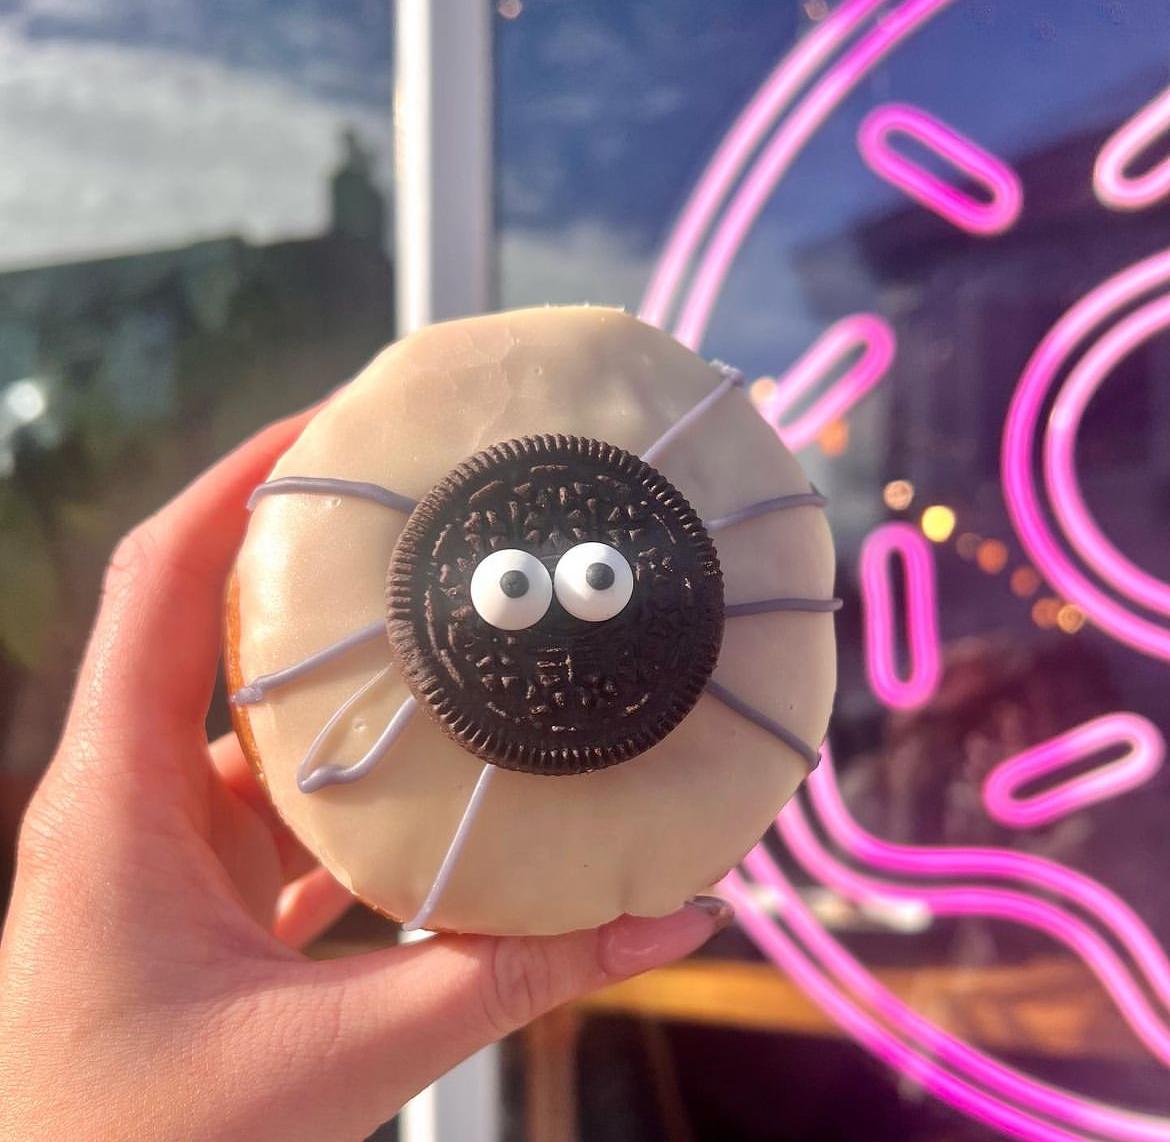 Spooky Oreo Spider. Credit: Doogle's Donuts